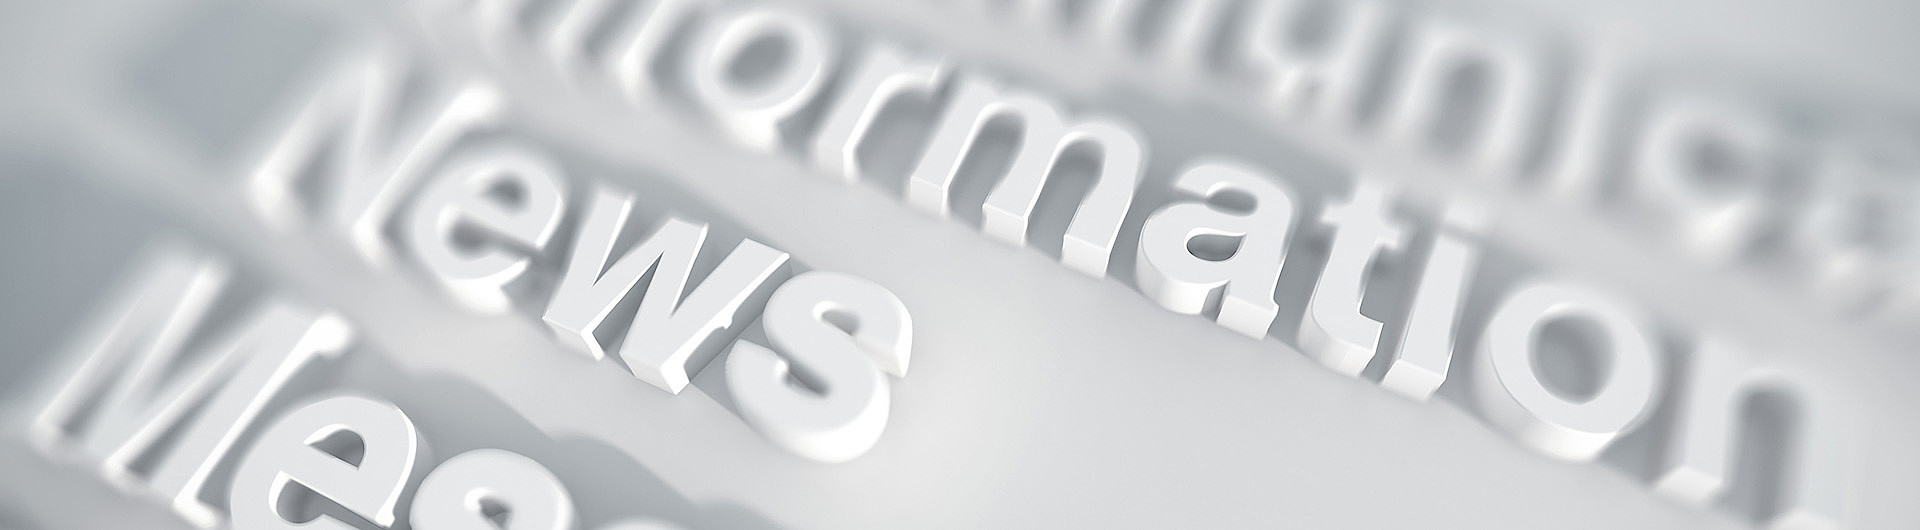 Several words (News) shown in relief on white background